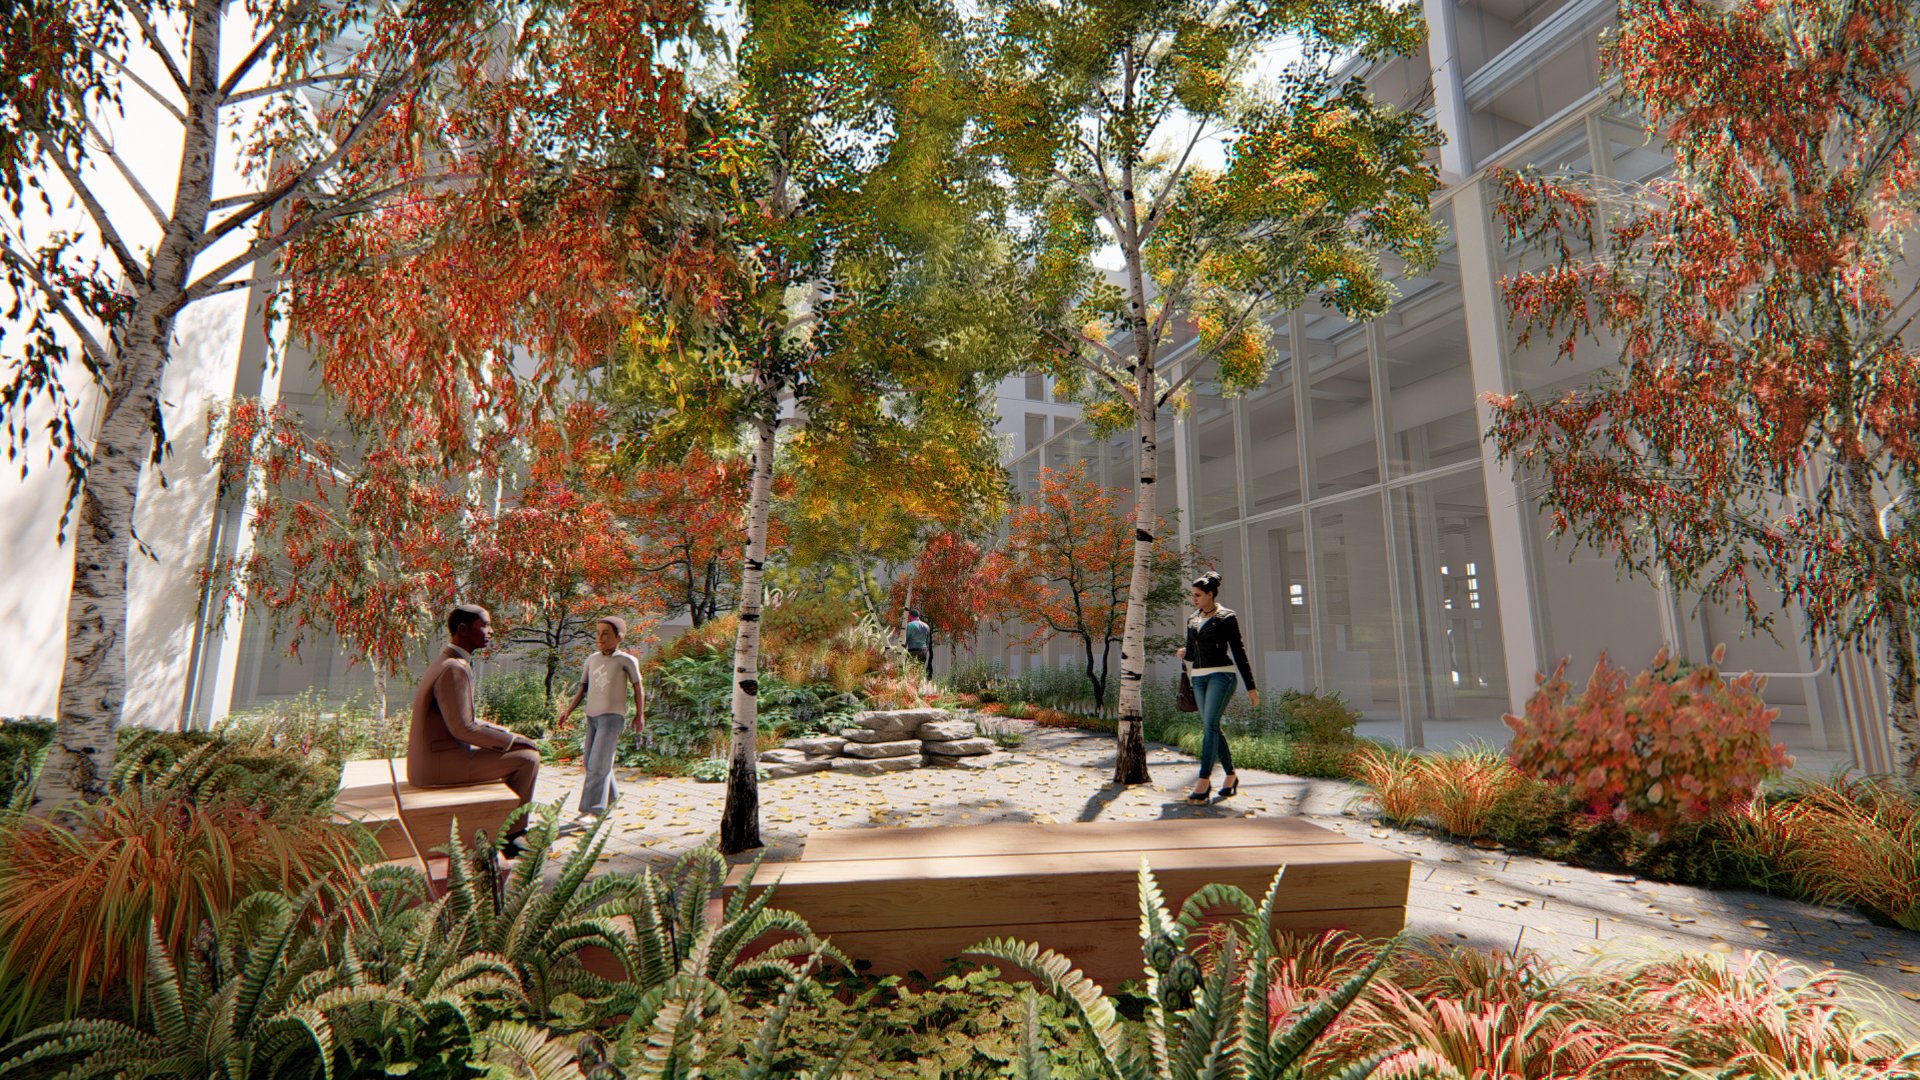 central courtyard - fall